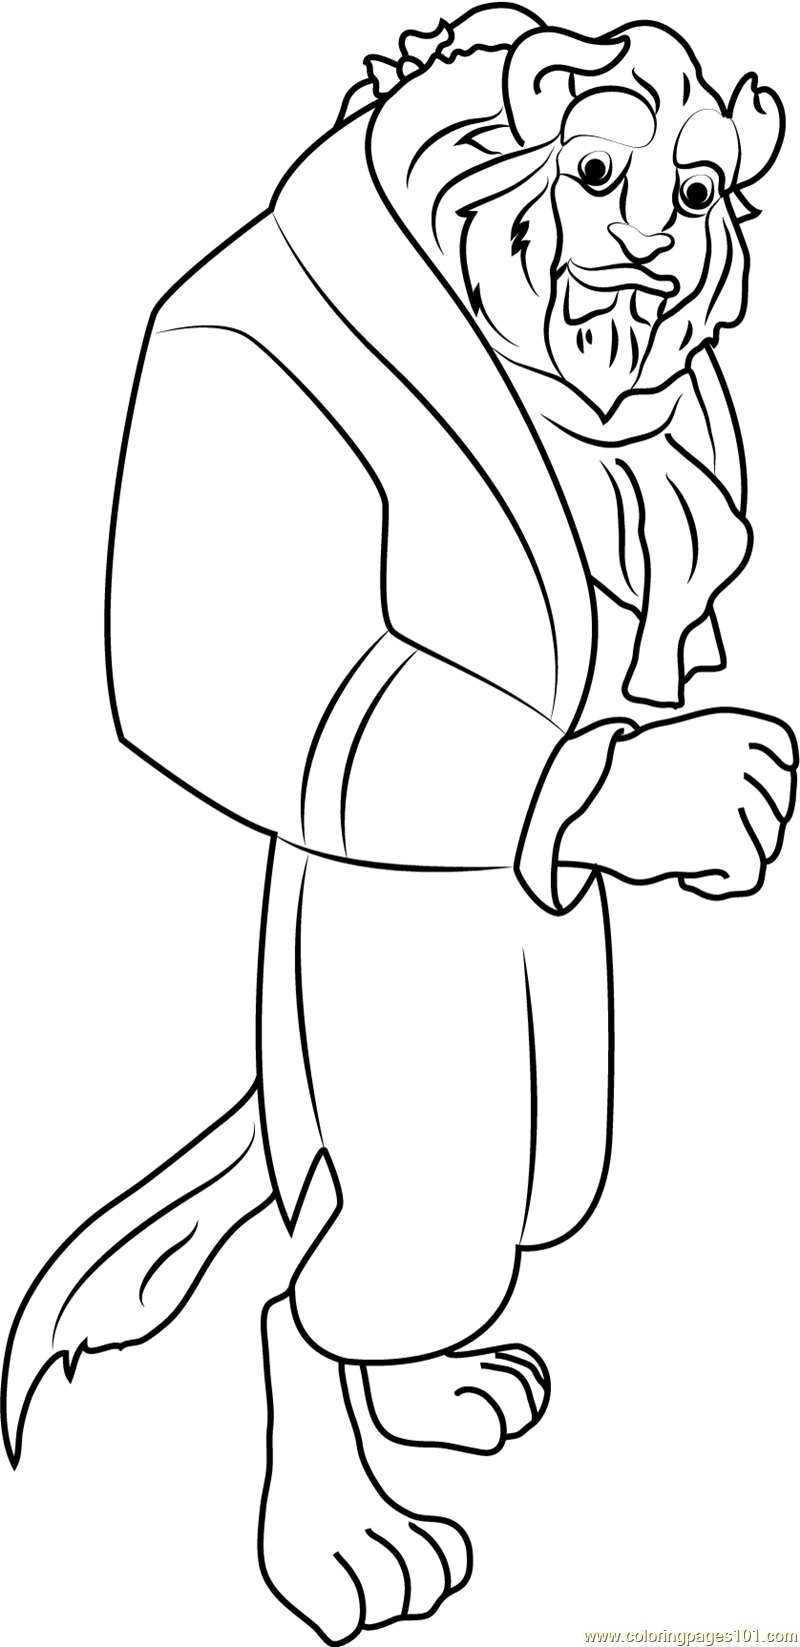 Character Beast Coloring Page for Kids   Free Beauty and the Beast ...